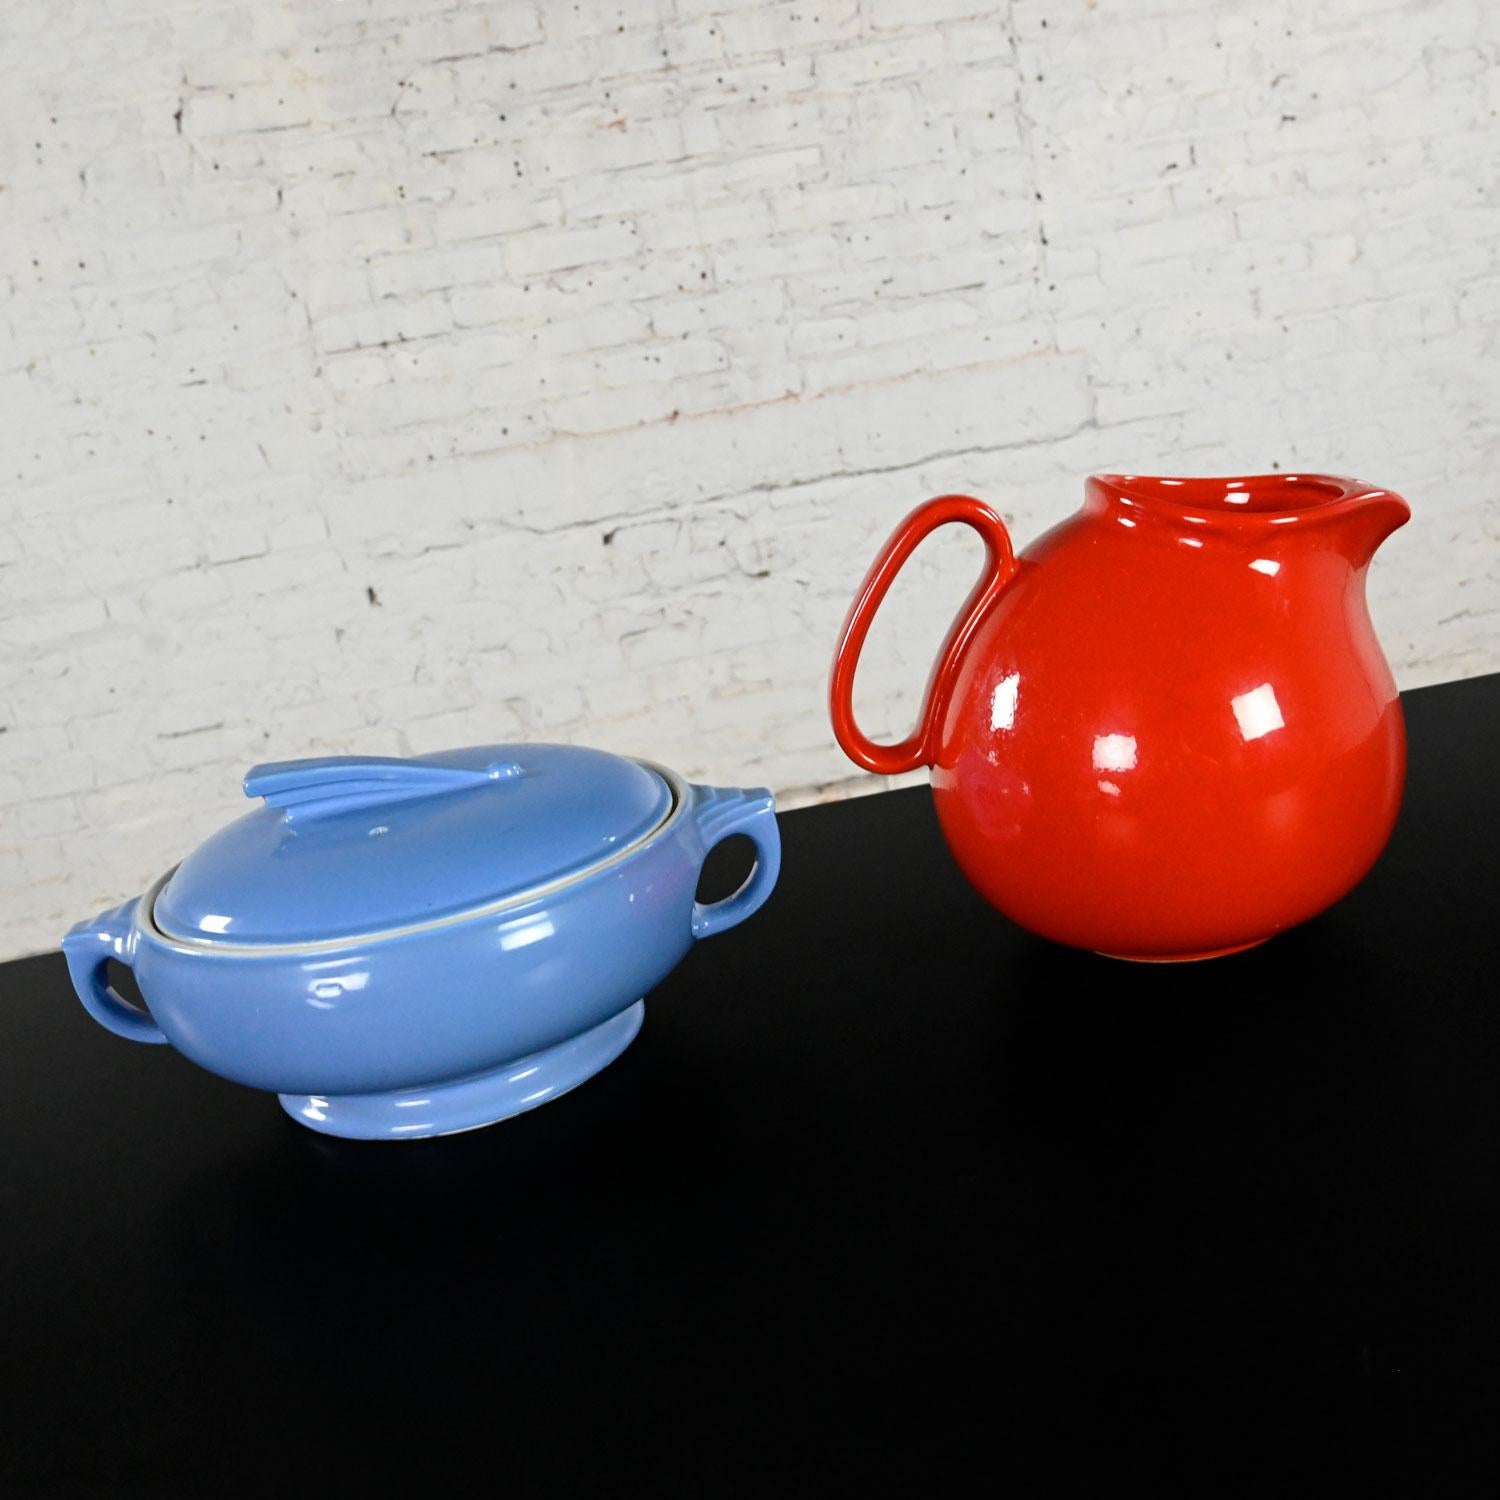 Fabulous vintage Mid-Century Modern solid colours red pitcher piece code PIT70 by Waechtersbach, Germany and a blue covered casserole “Sundial” dish by Hall. Beautiful condition, keeping in mind that these are vintage and not new so will have signs